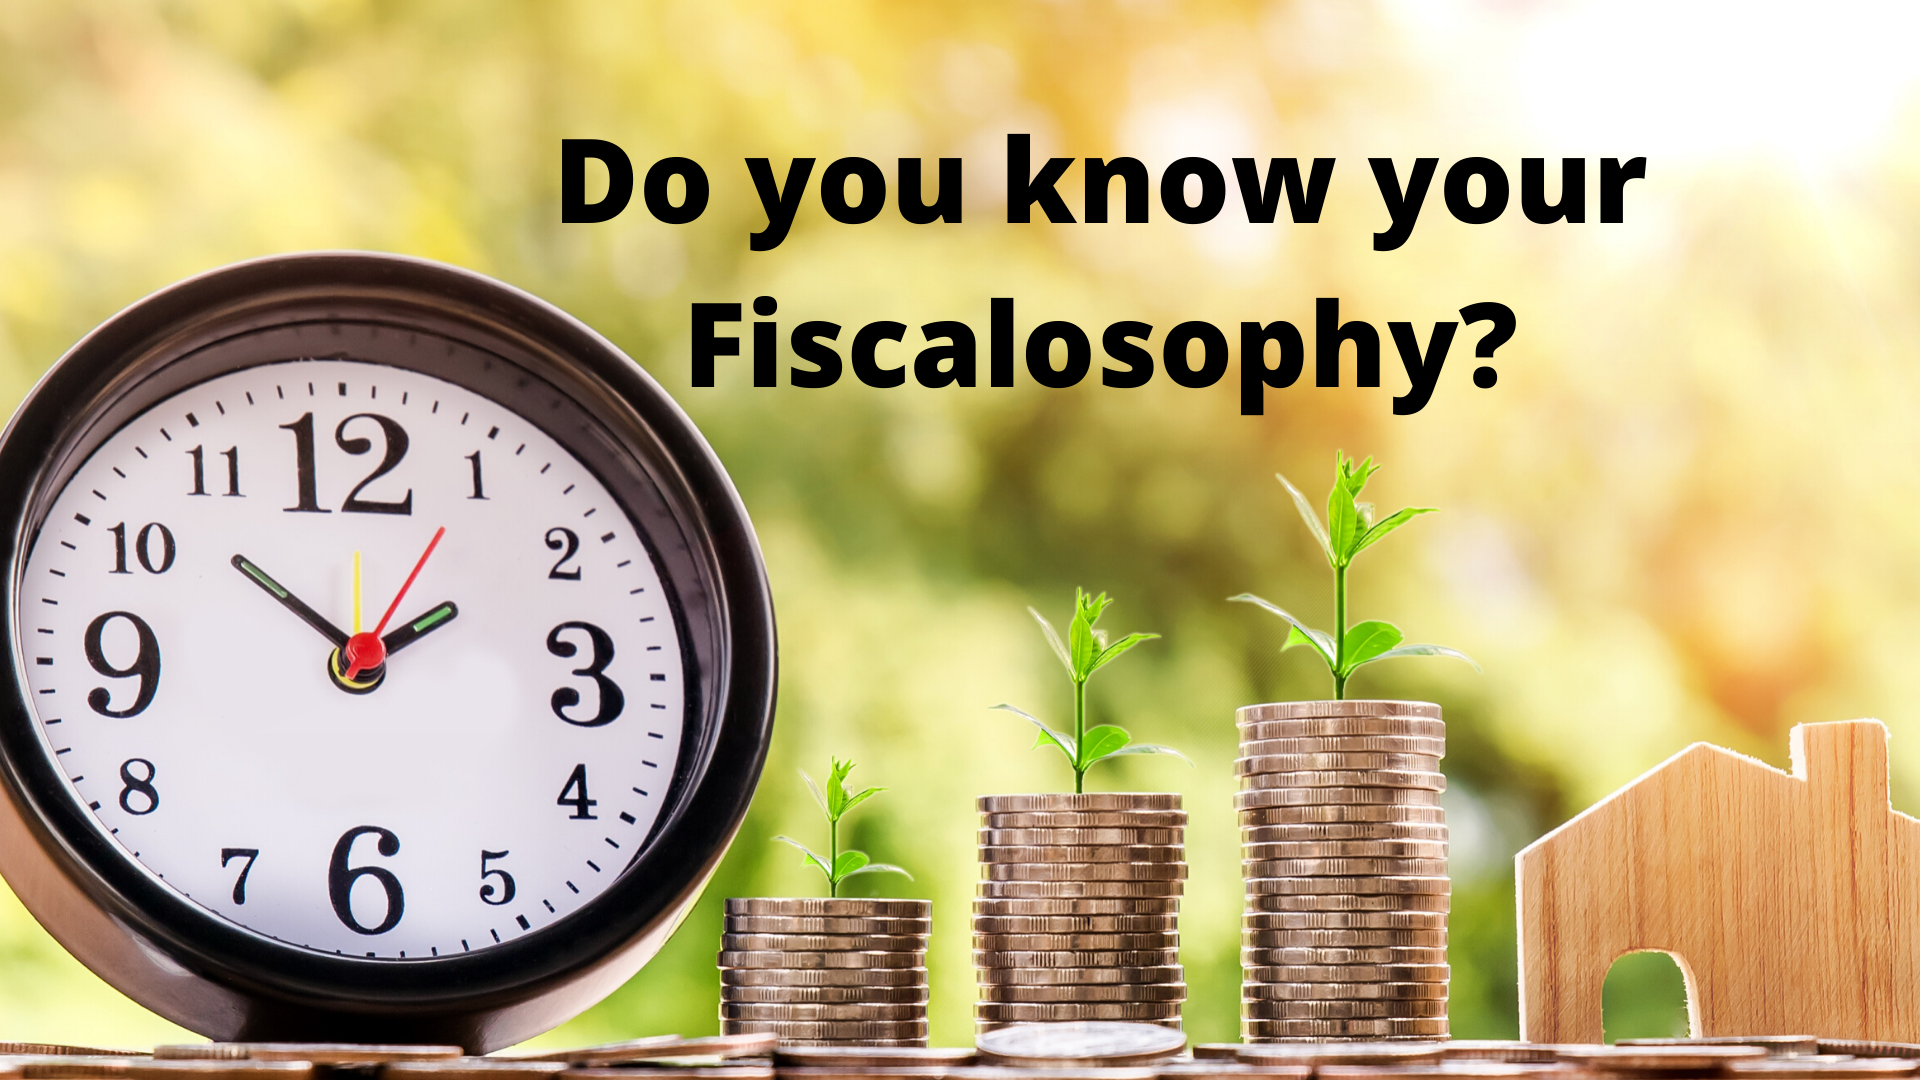  What’s Your “Fiscalosophy”?